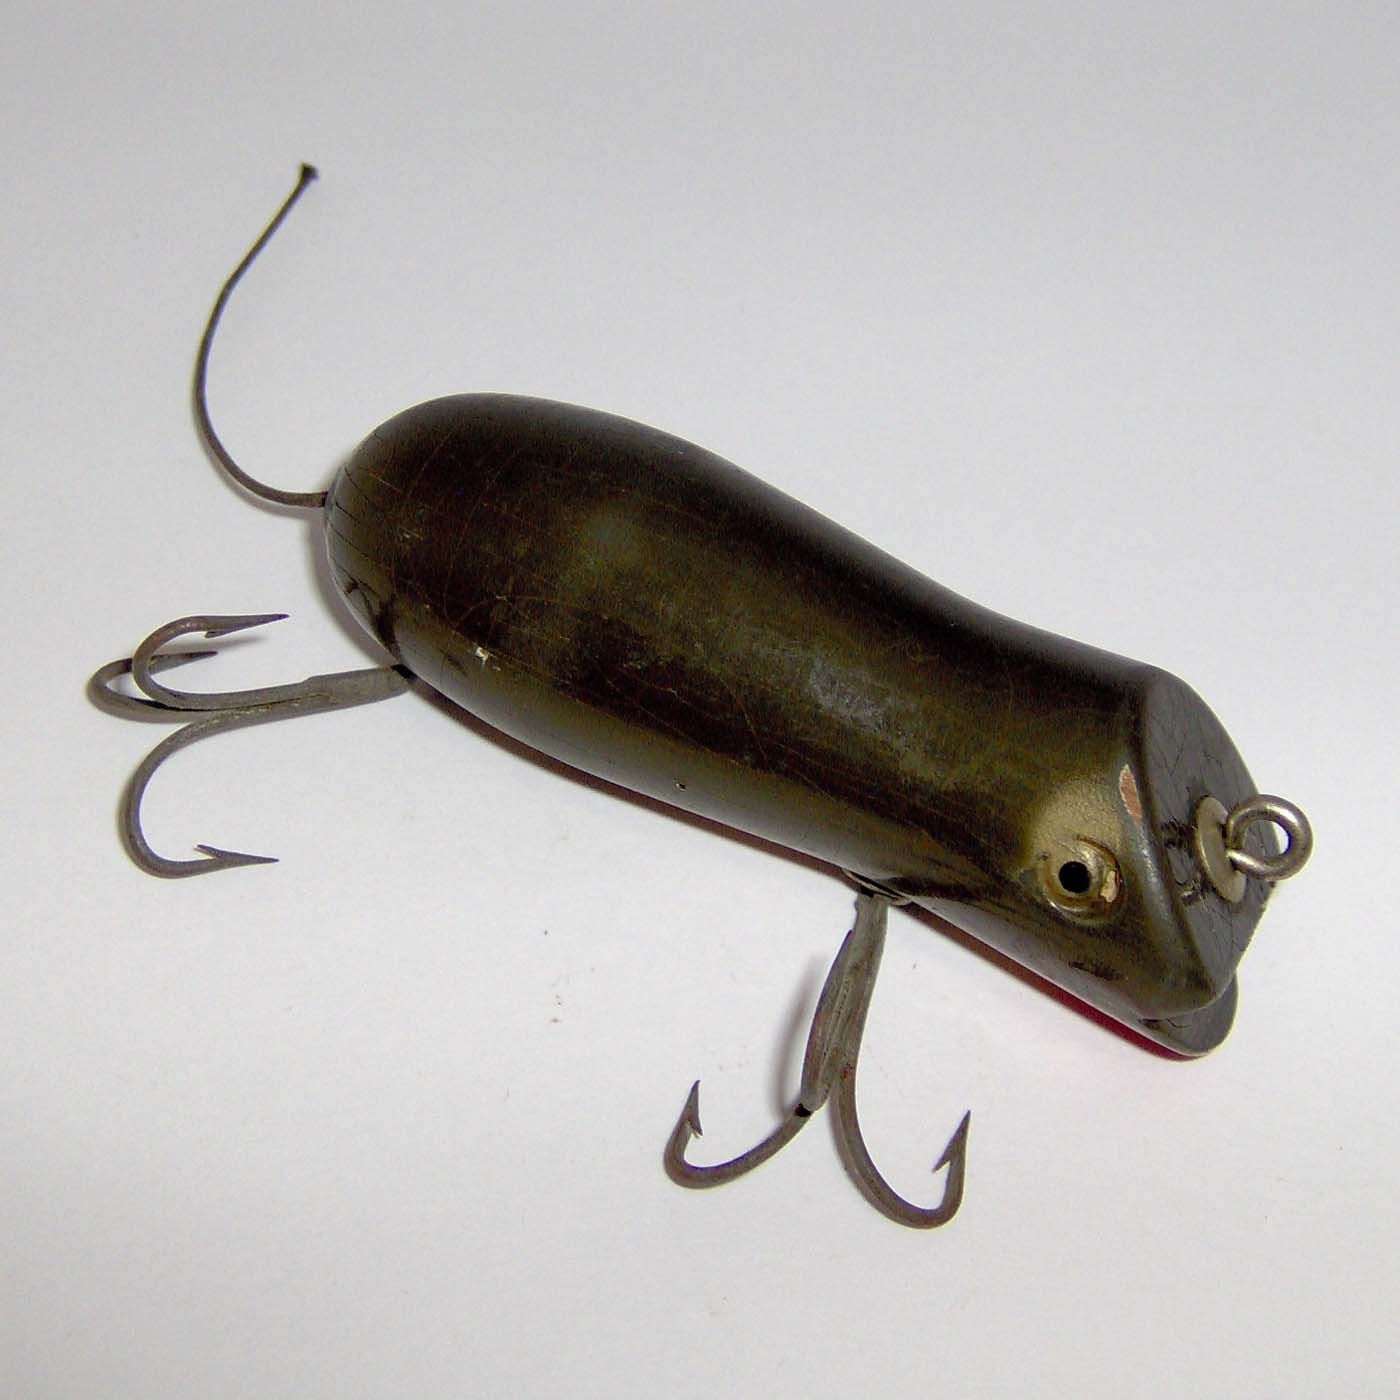 VINTAGE SHAKESPEARE SWIMMING MOUSE WOOD LURE - cool old wood lure